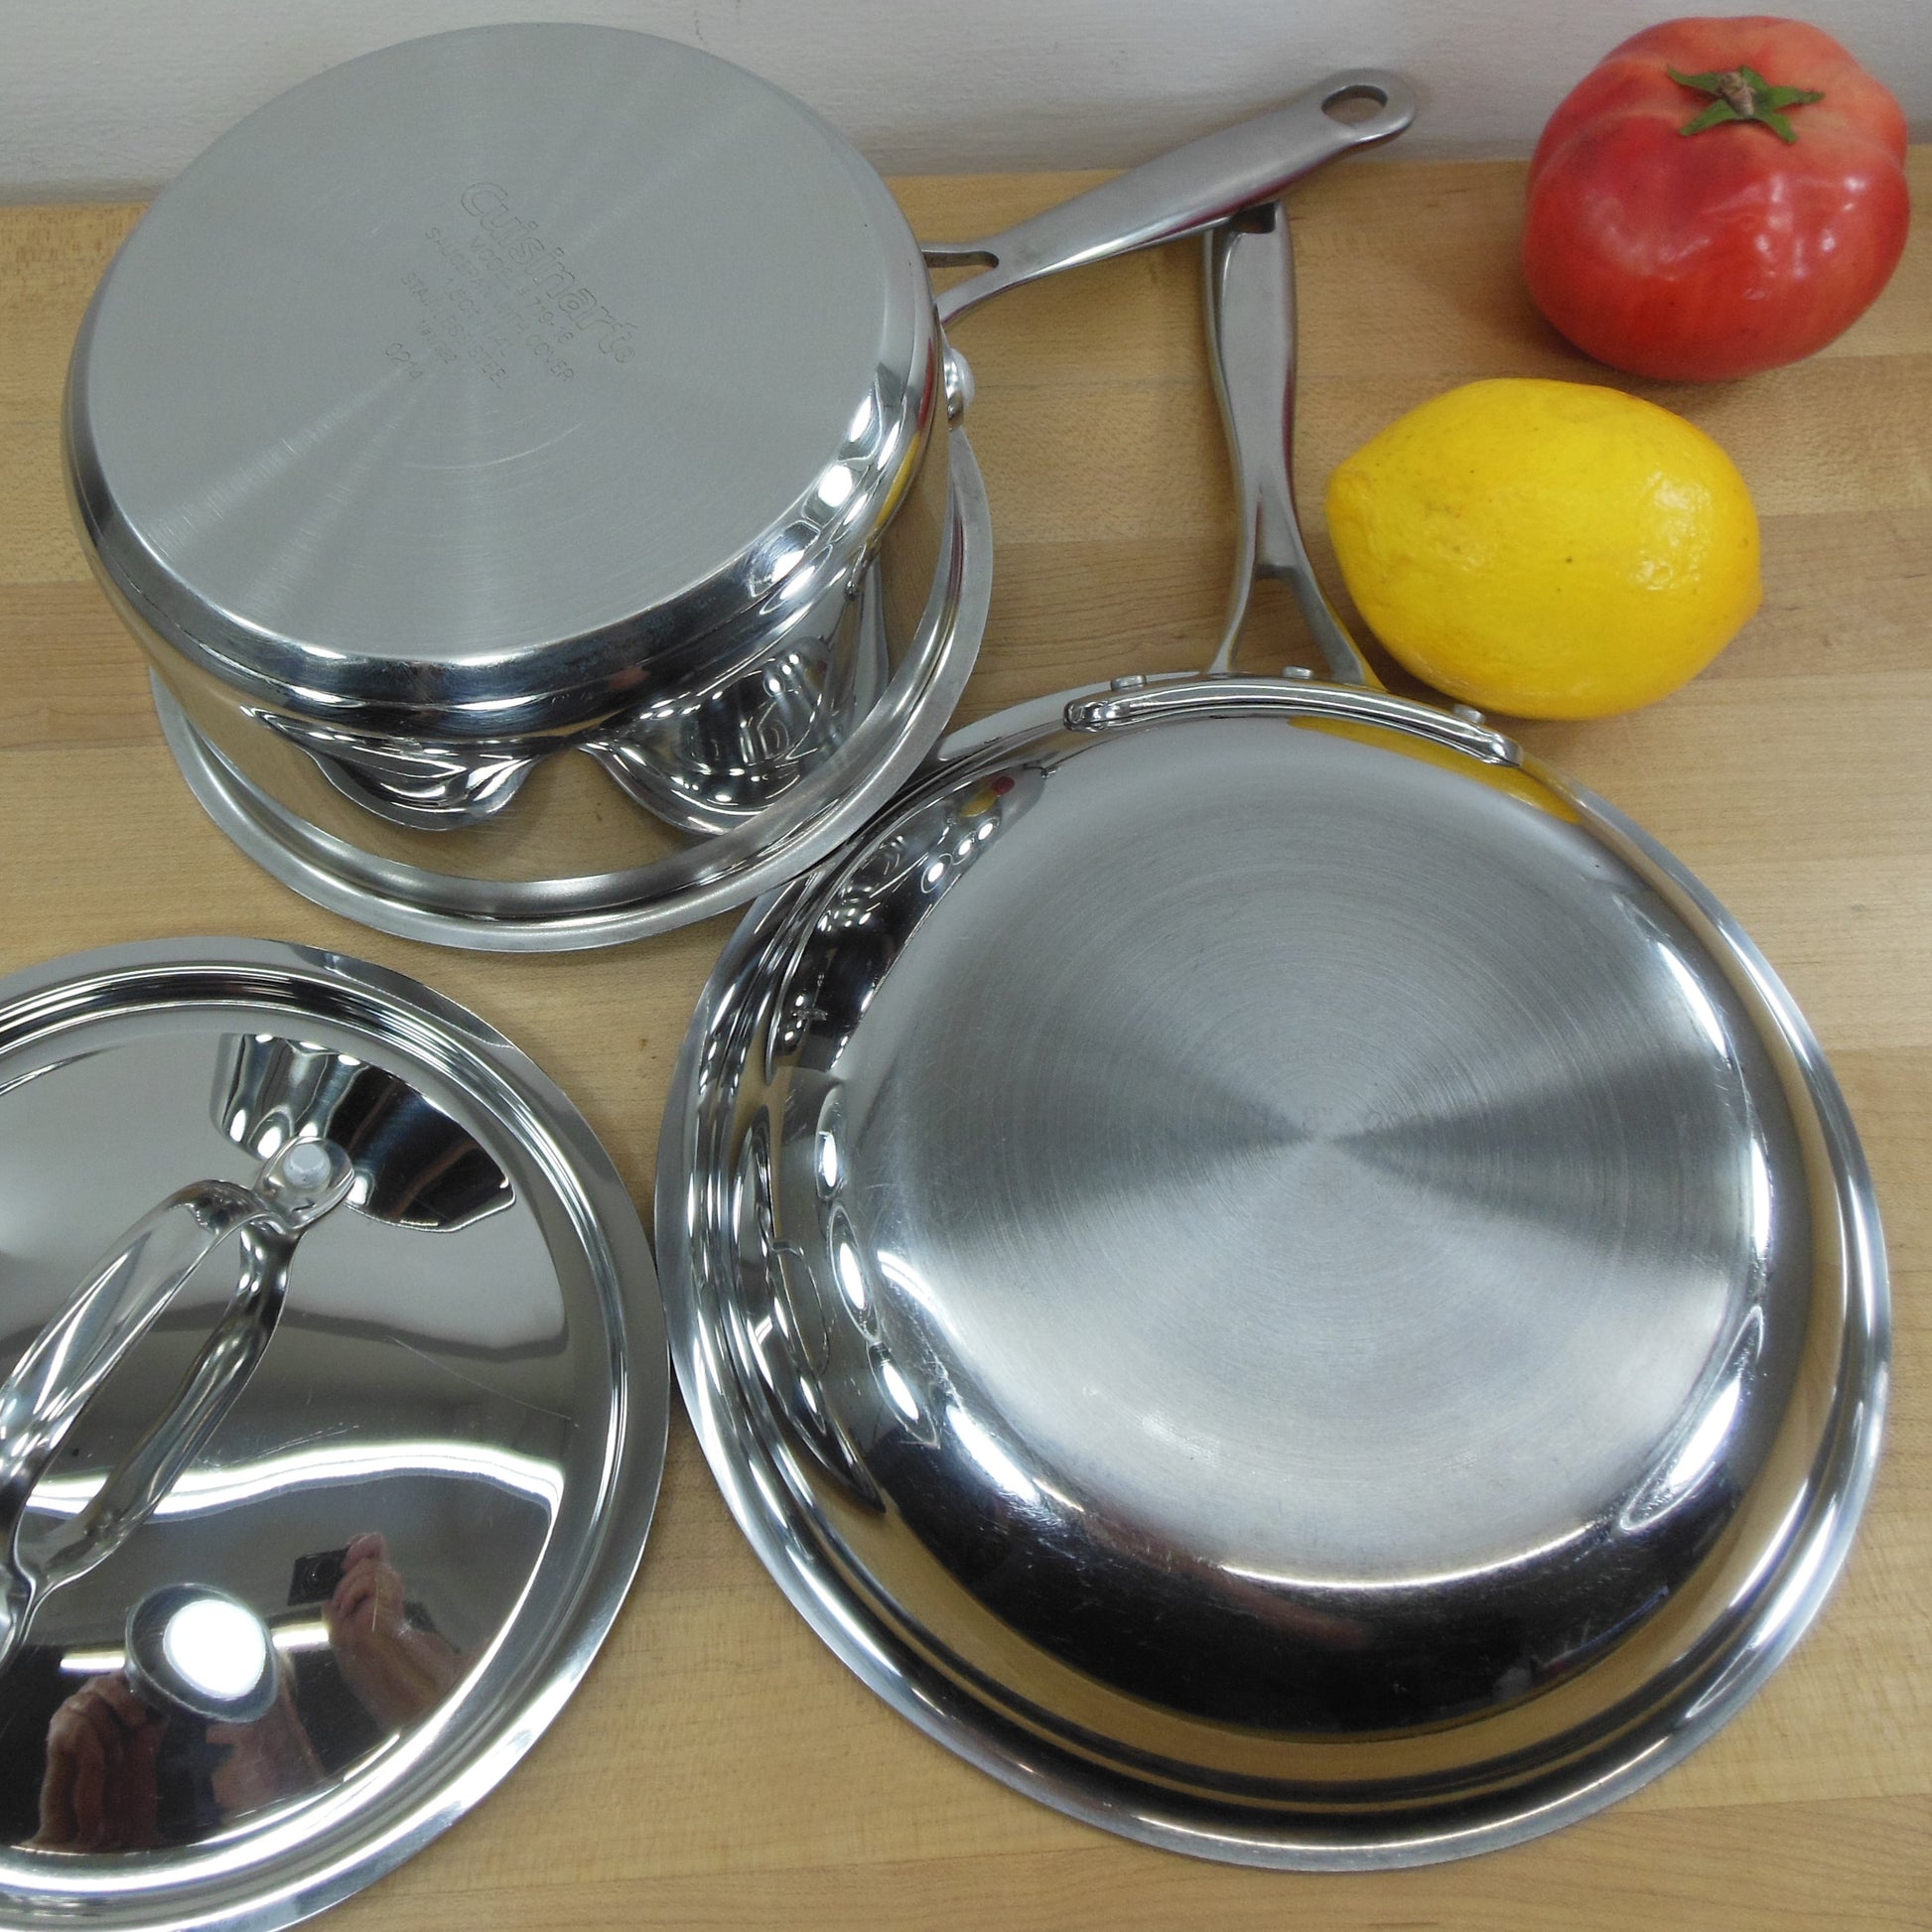 Calphalon Tri-ply Stainless Steel Sauce Pan with Lid France